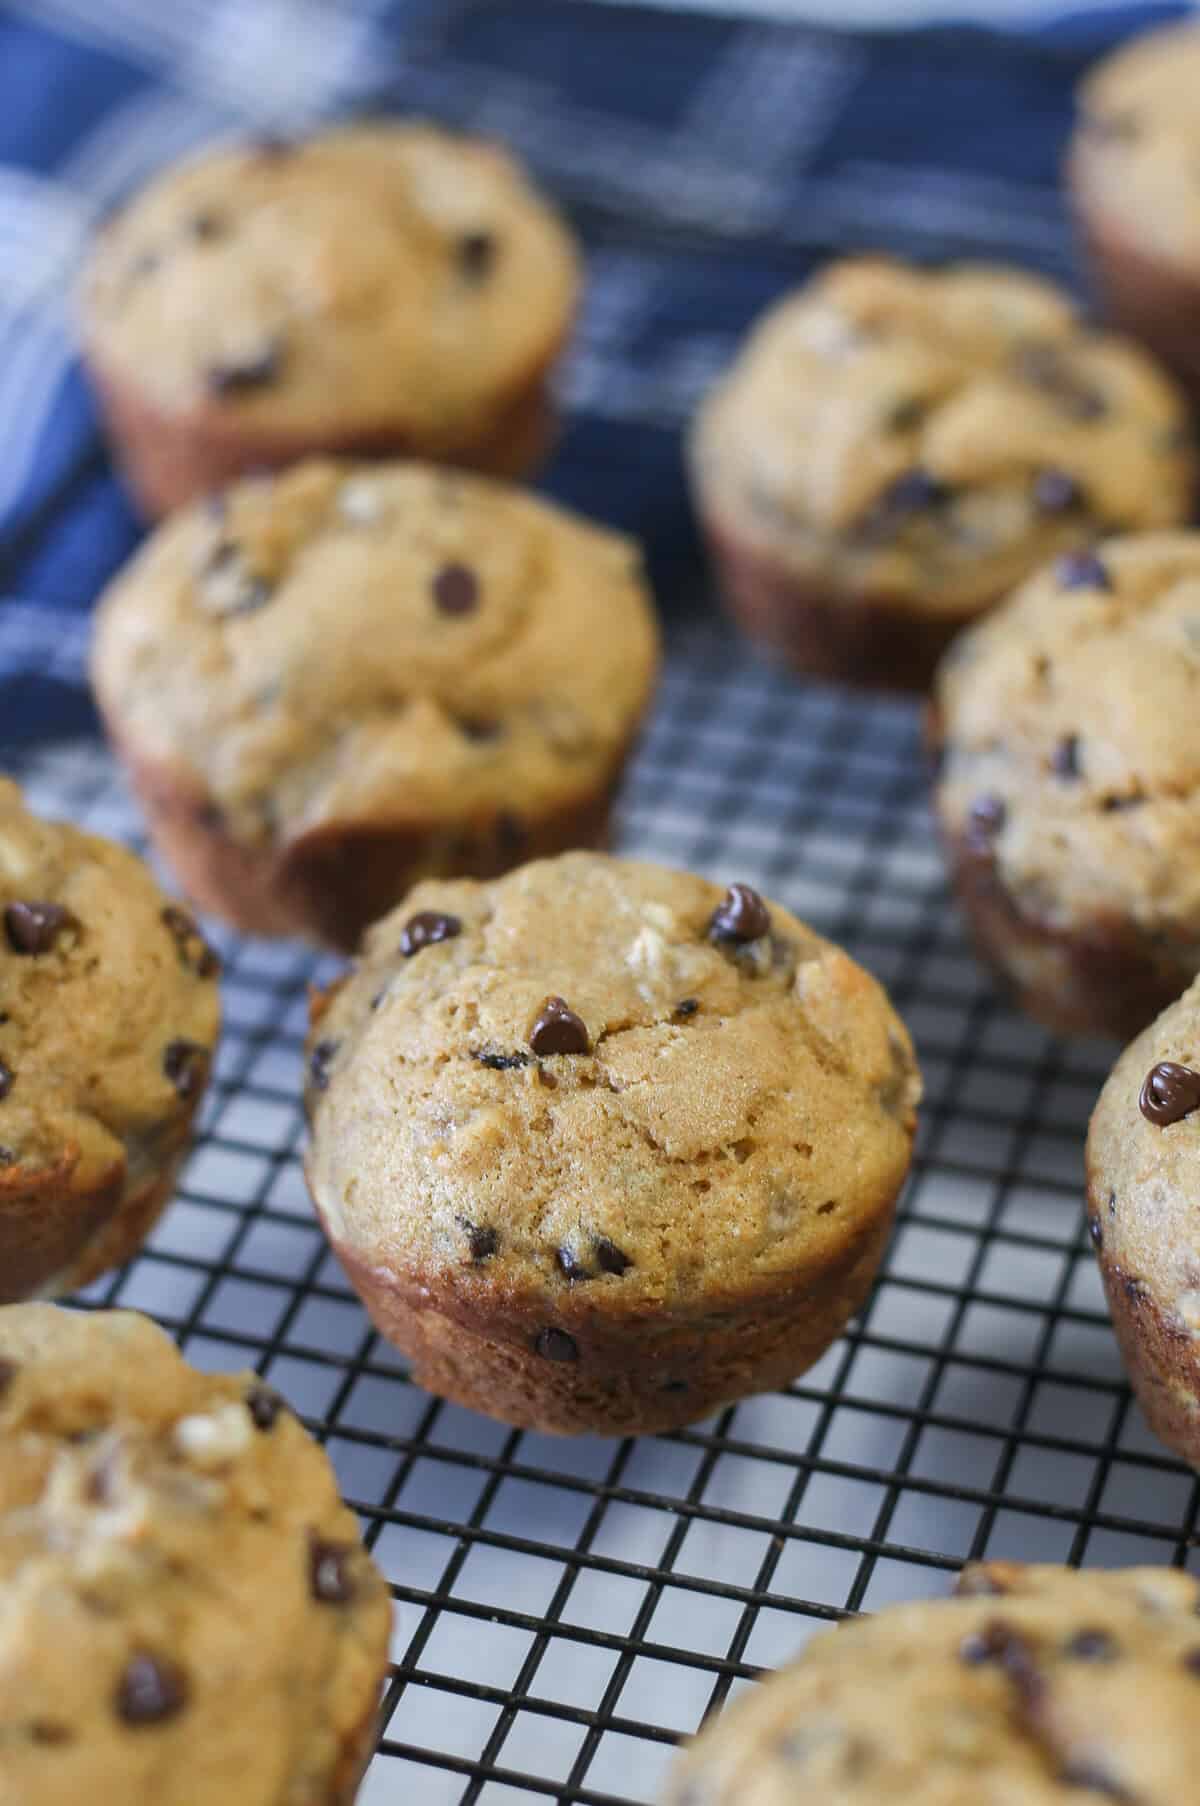 Multiple banana chocolate chip muffins on a cooling rack.